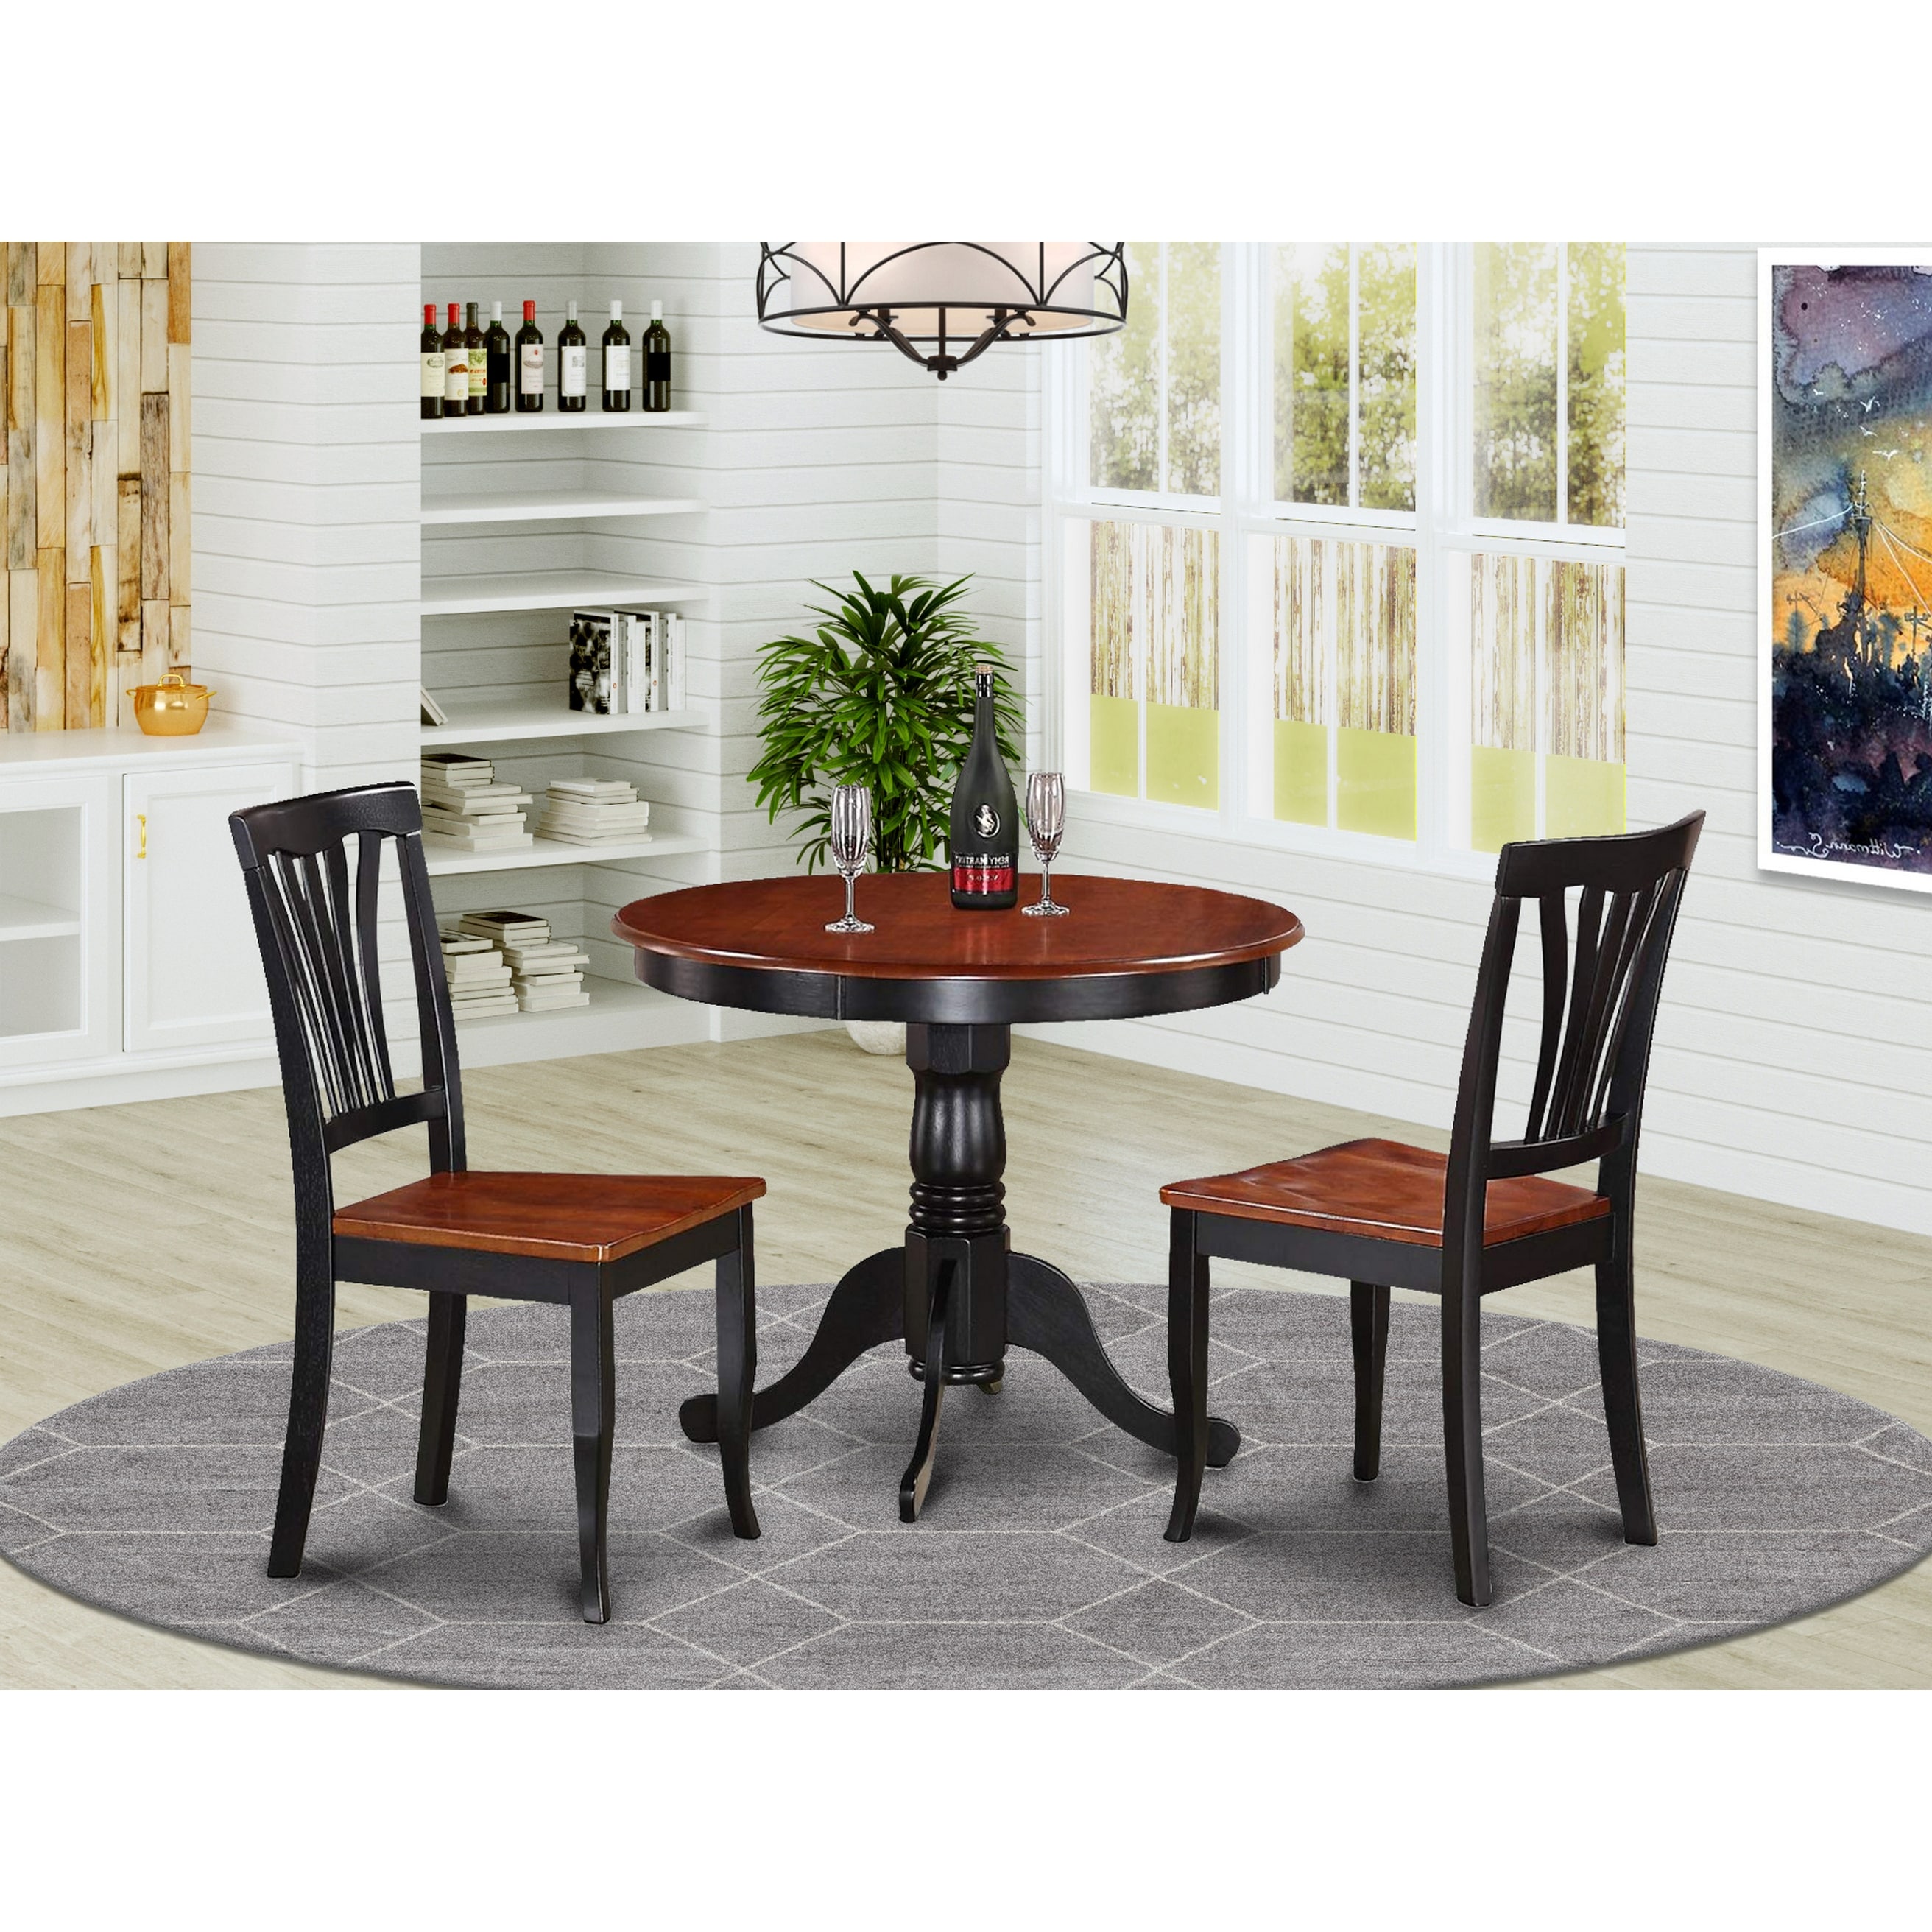 200 piece Kitchen Nook Dining Set   Small Kitchen Table and 20 ...